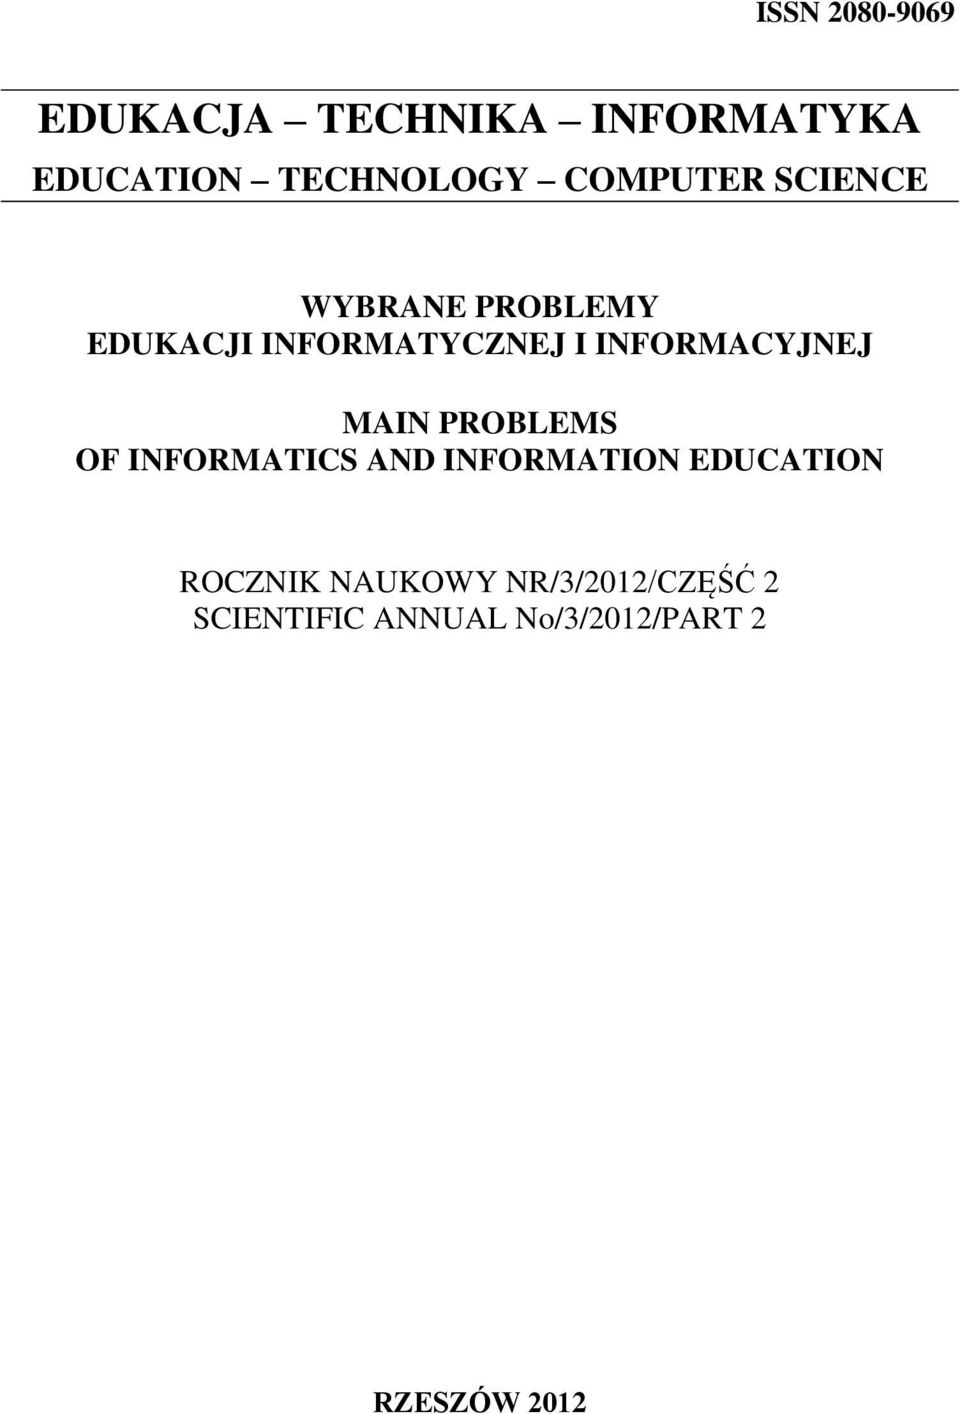 INFORMACYJNEJ MAIN PROBLEMS OF INFORMATICS AND INFORMATION EDUCATION